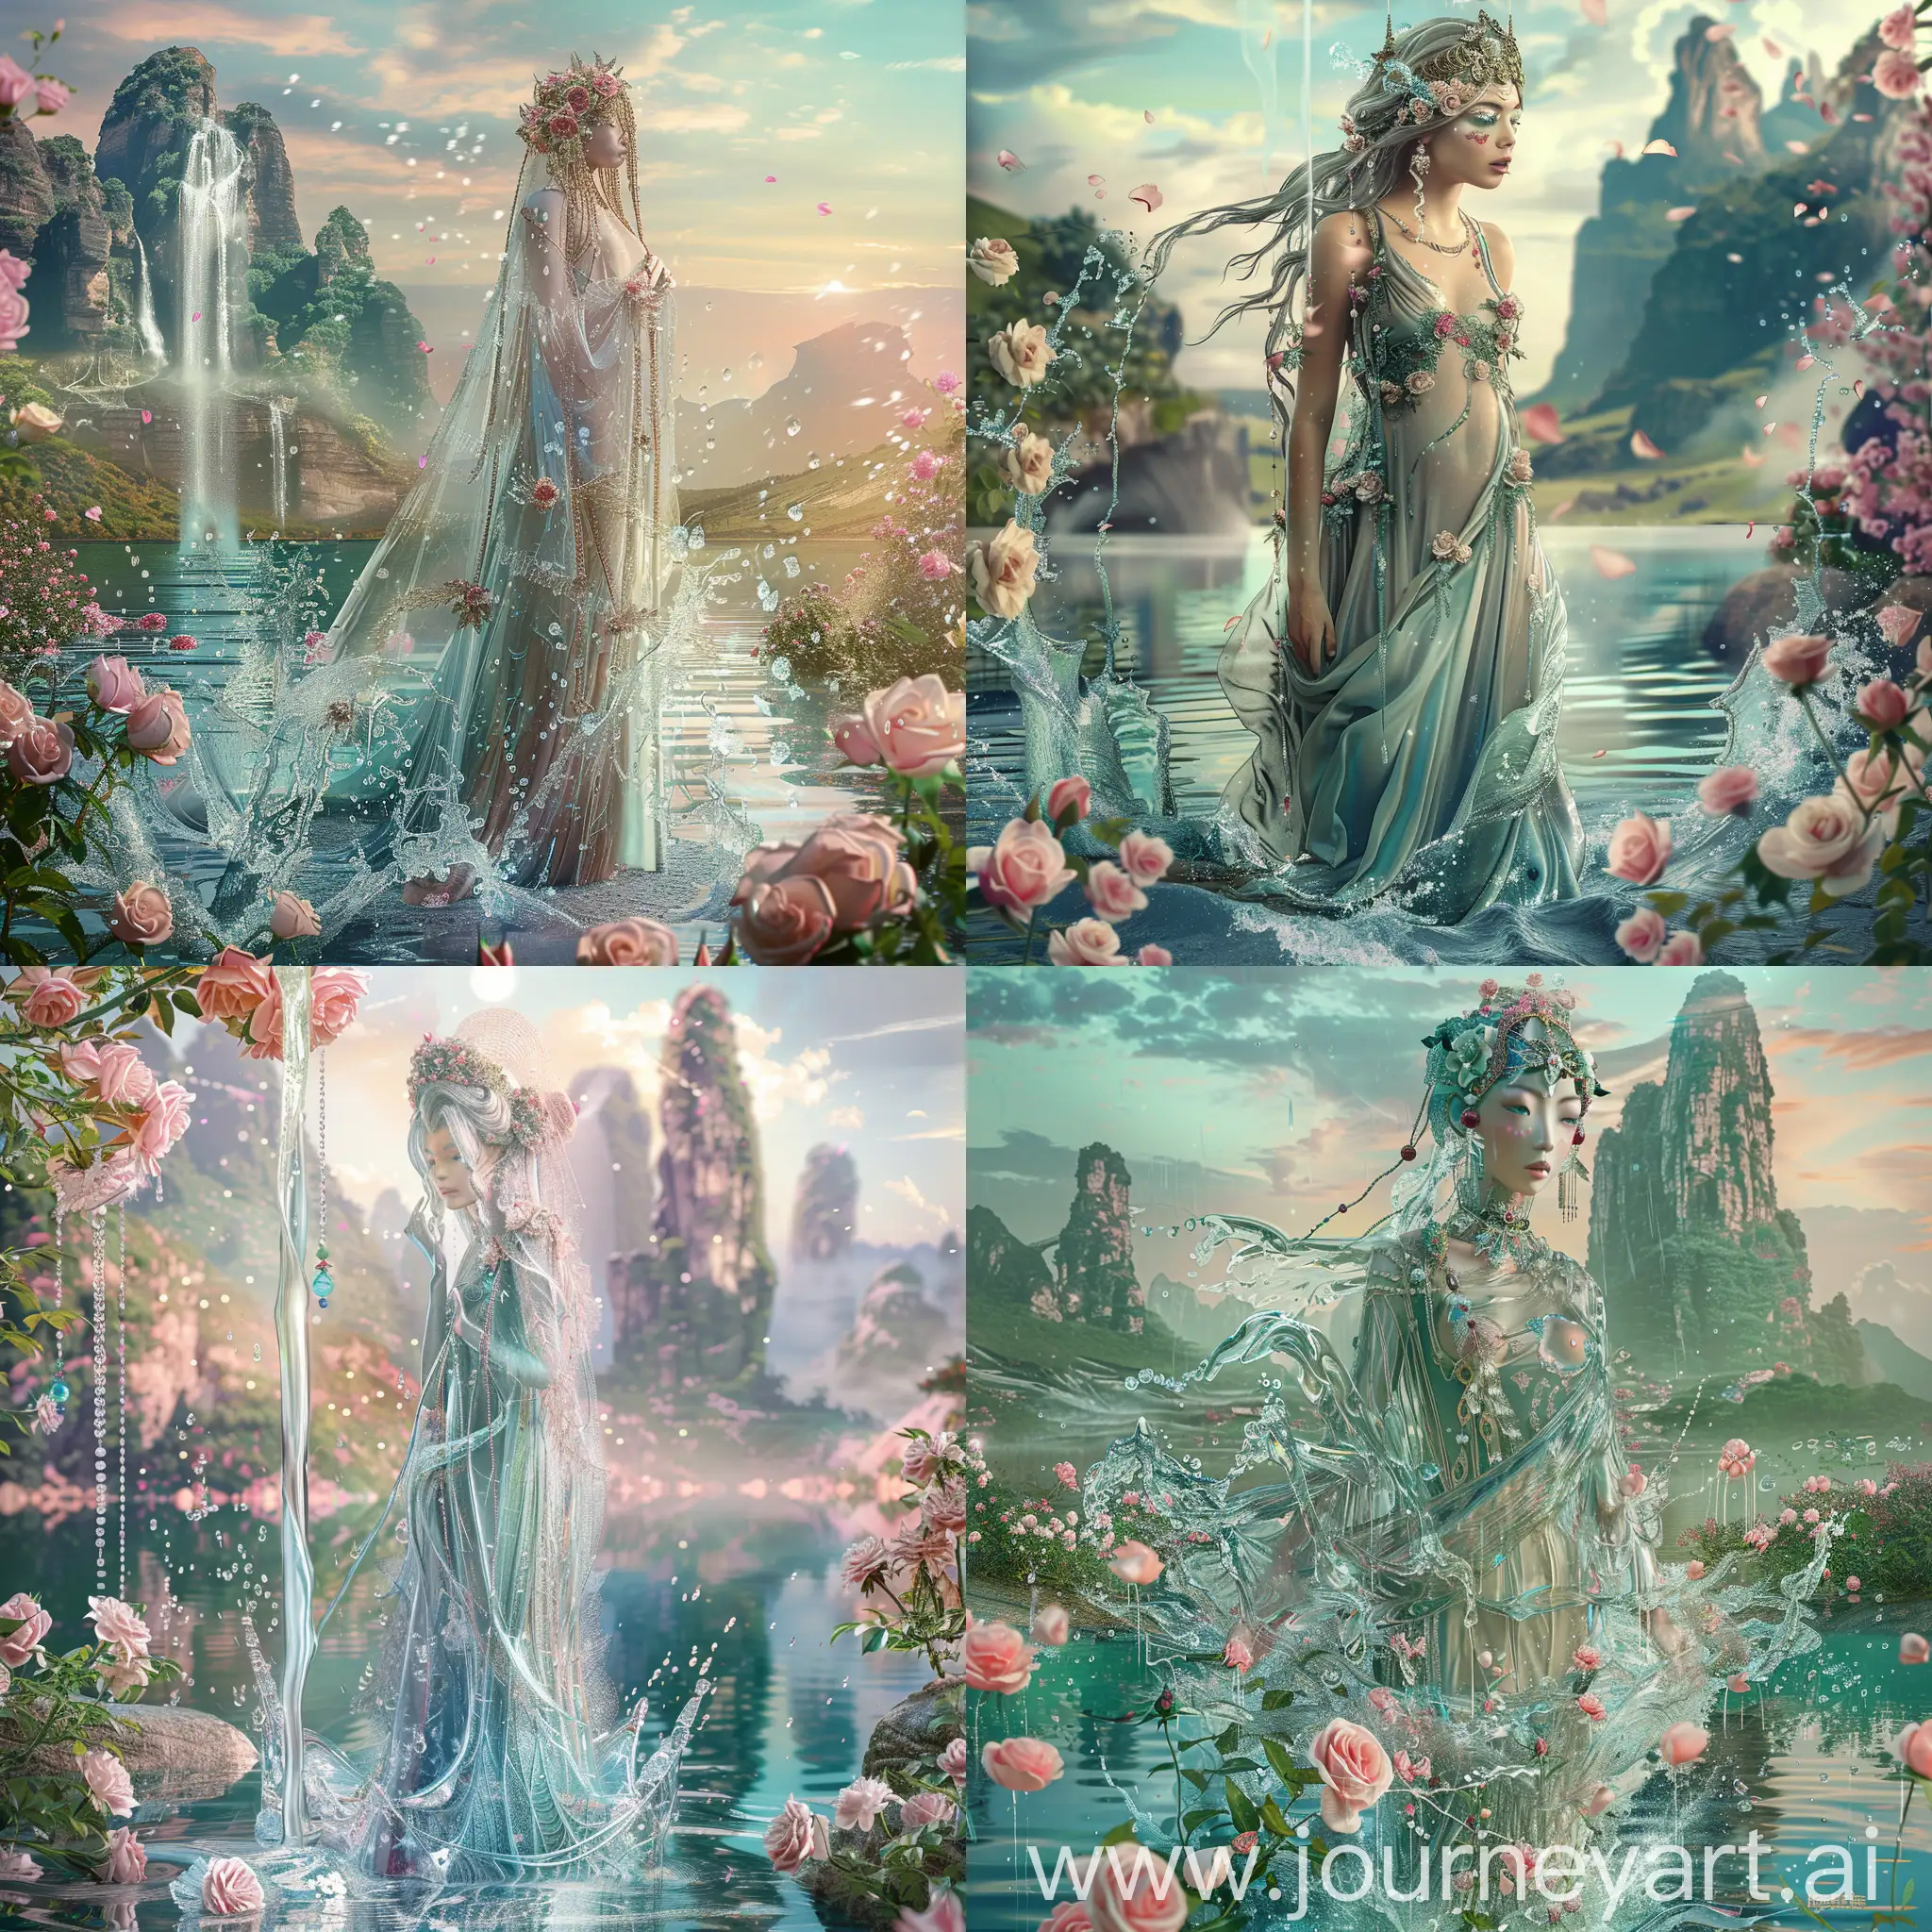 Enchanting-Water-Nymph-in-Flowing-Dress-Amidst-Serene-Mountain-Lake